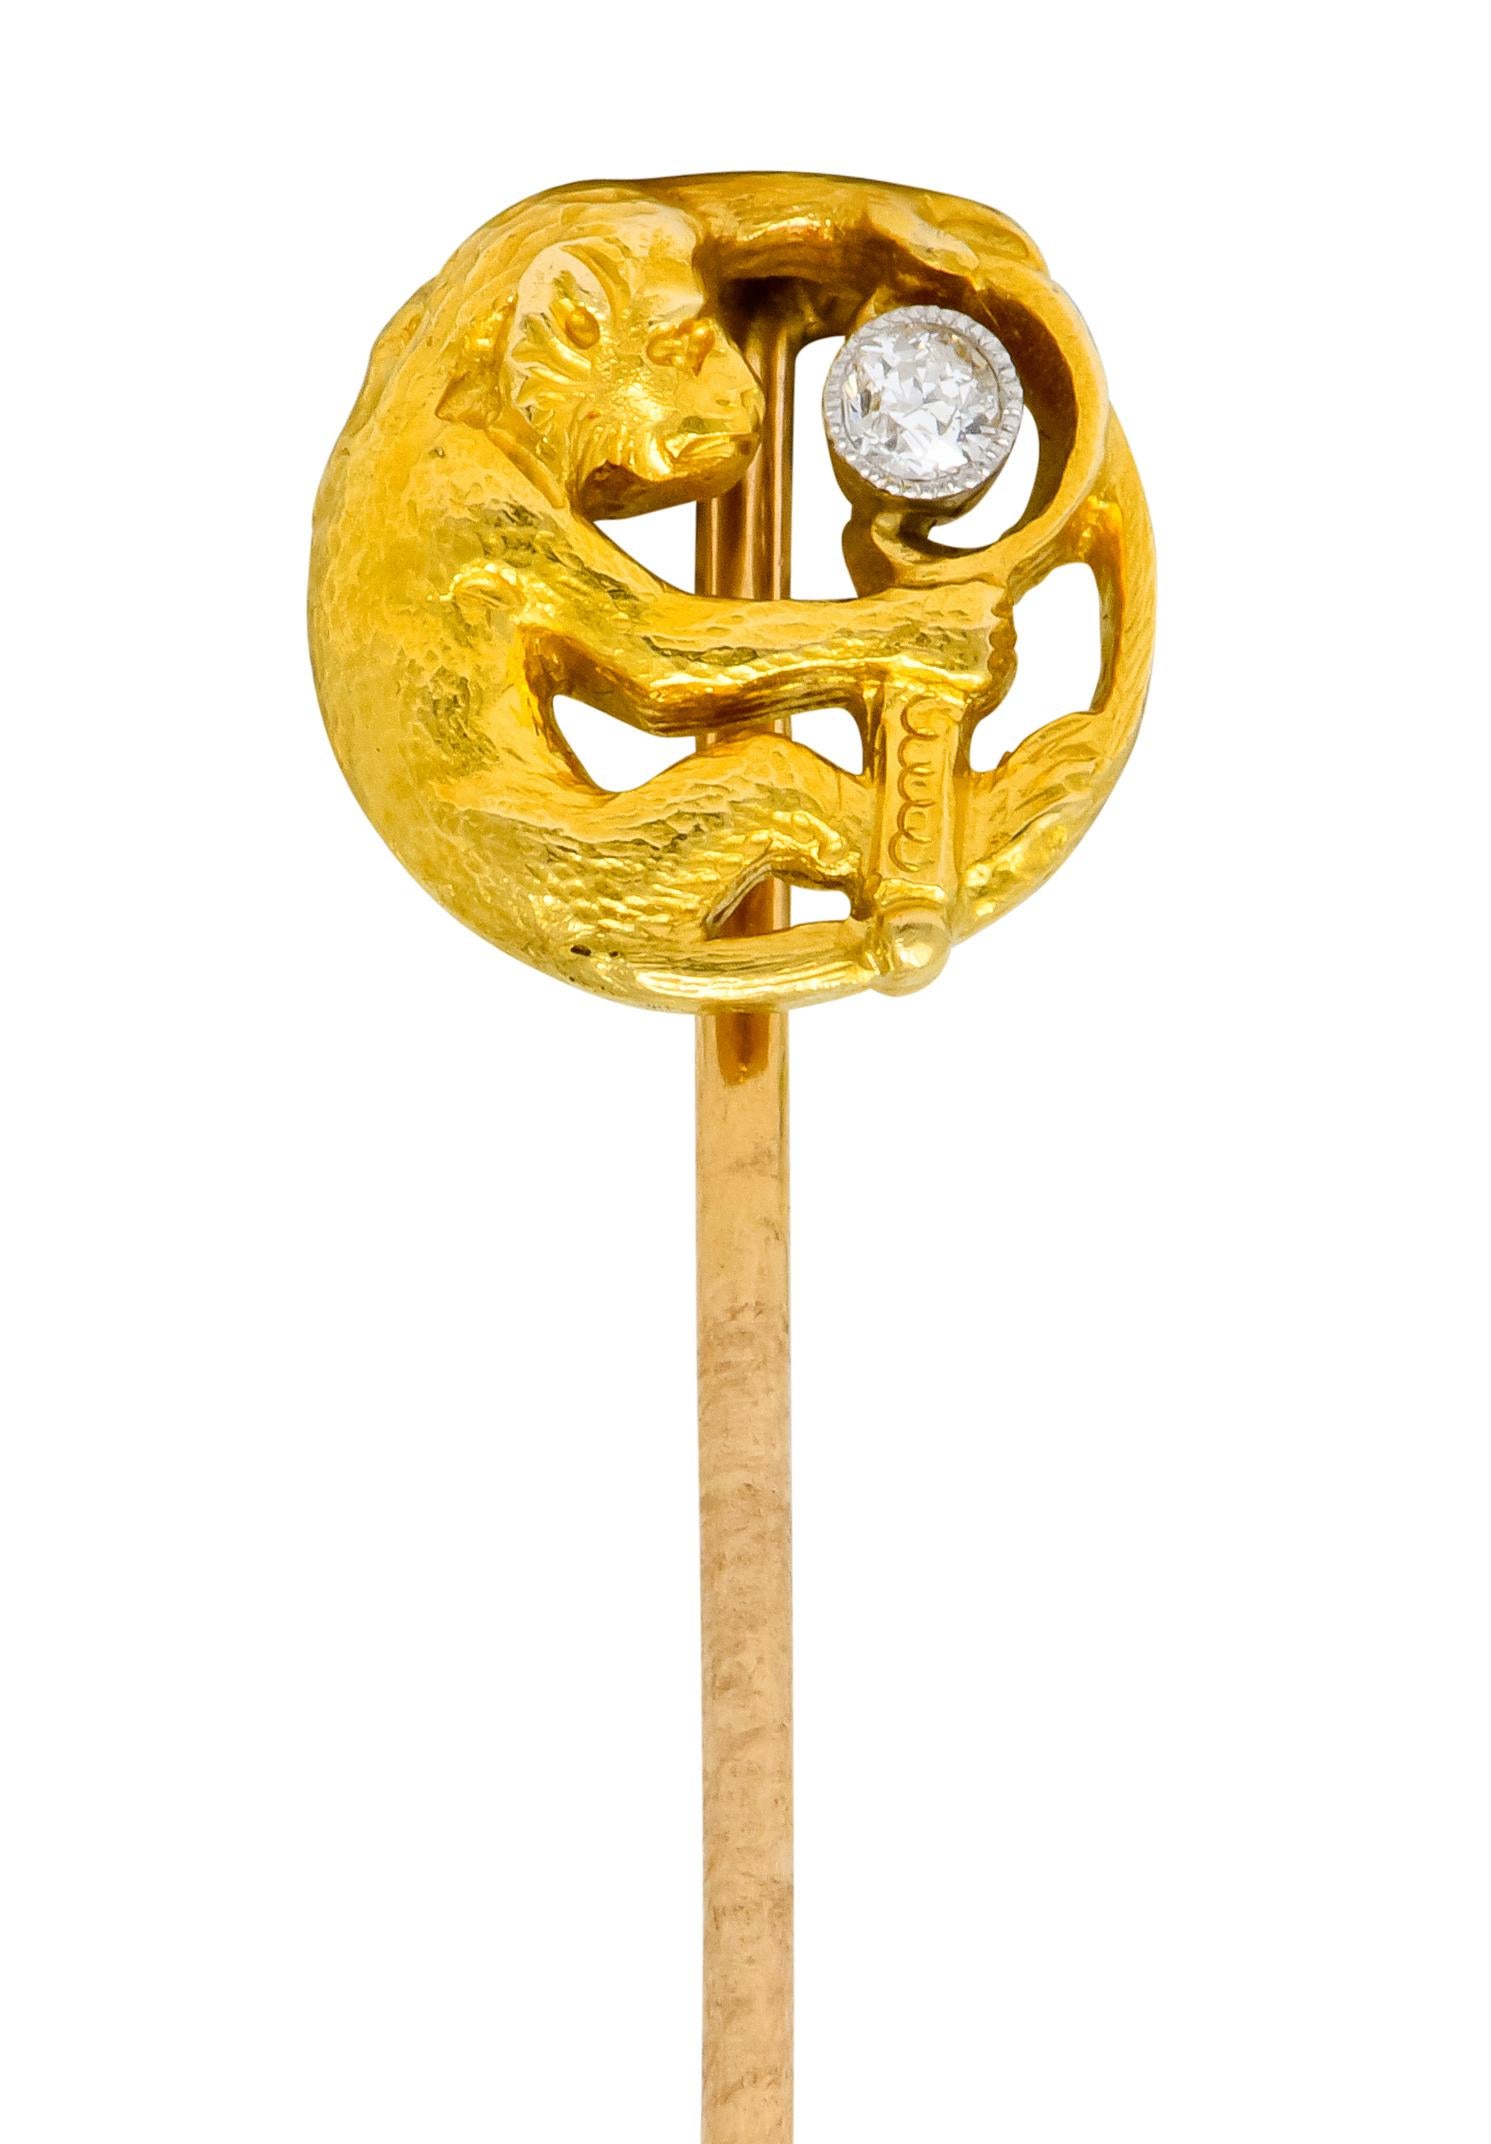 Circular stickpin depicting a monkey holding a mirror with finely textured fur

Mirror accented by old European cut diamond, bezel set in milgrain platinum, weighing approximately 0.06 carat; eye-clean and white

Tested as platinum-topped 18 karat